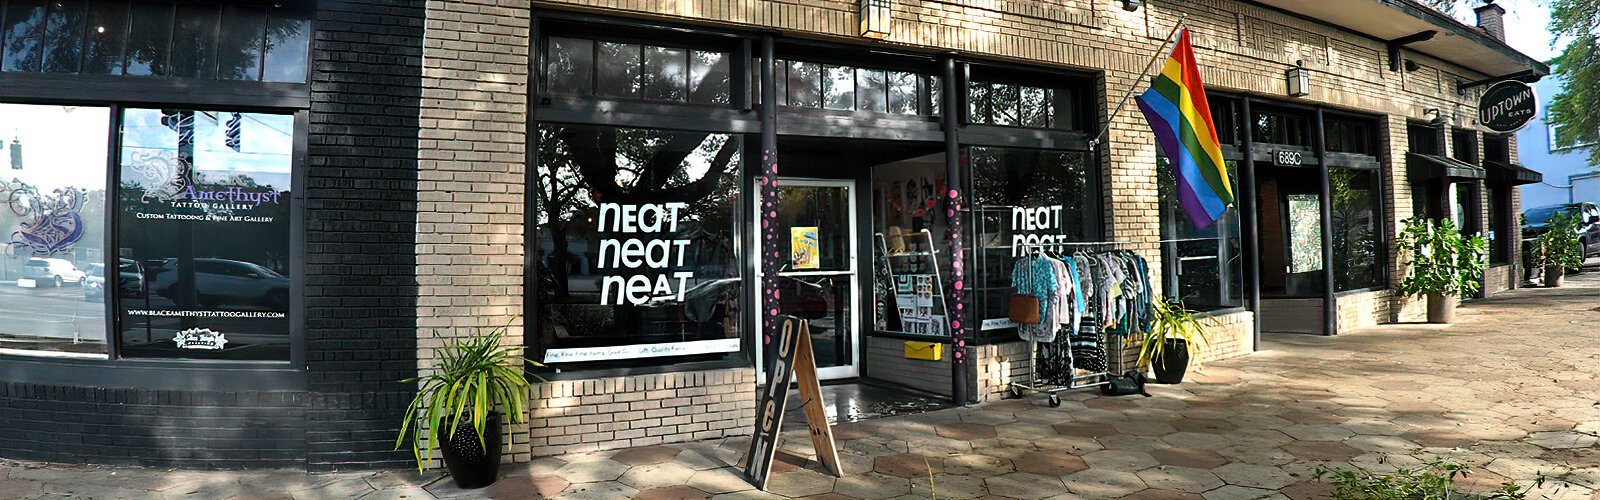 Named for the song by punk band The Damned, the shop Neat Neat Neat offers unique and edgy items in the MLK North District of St Petersburg.